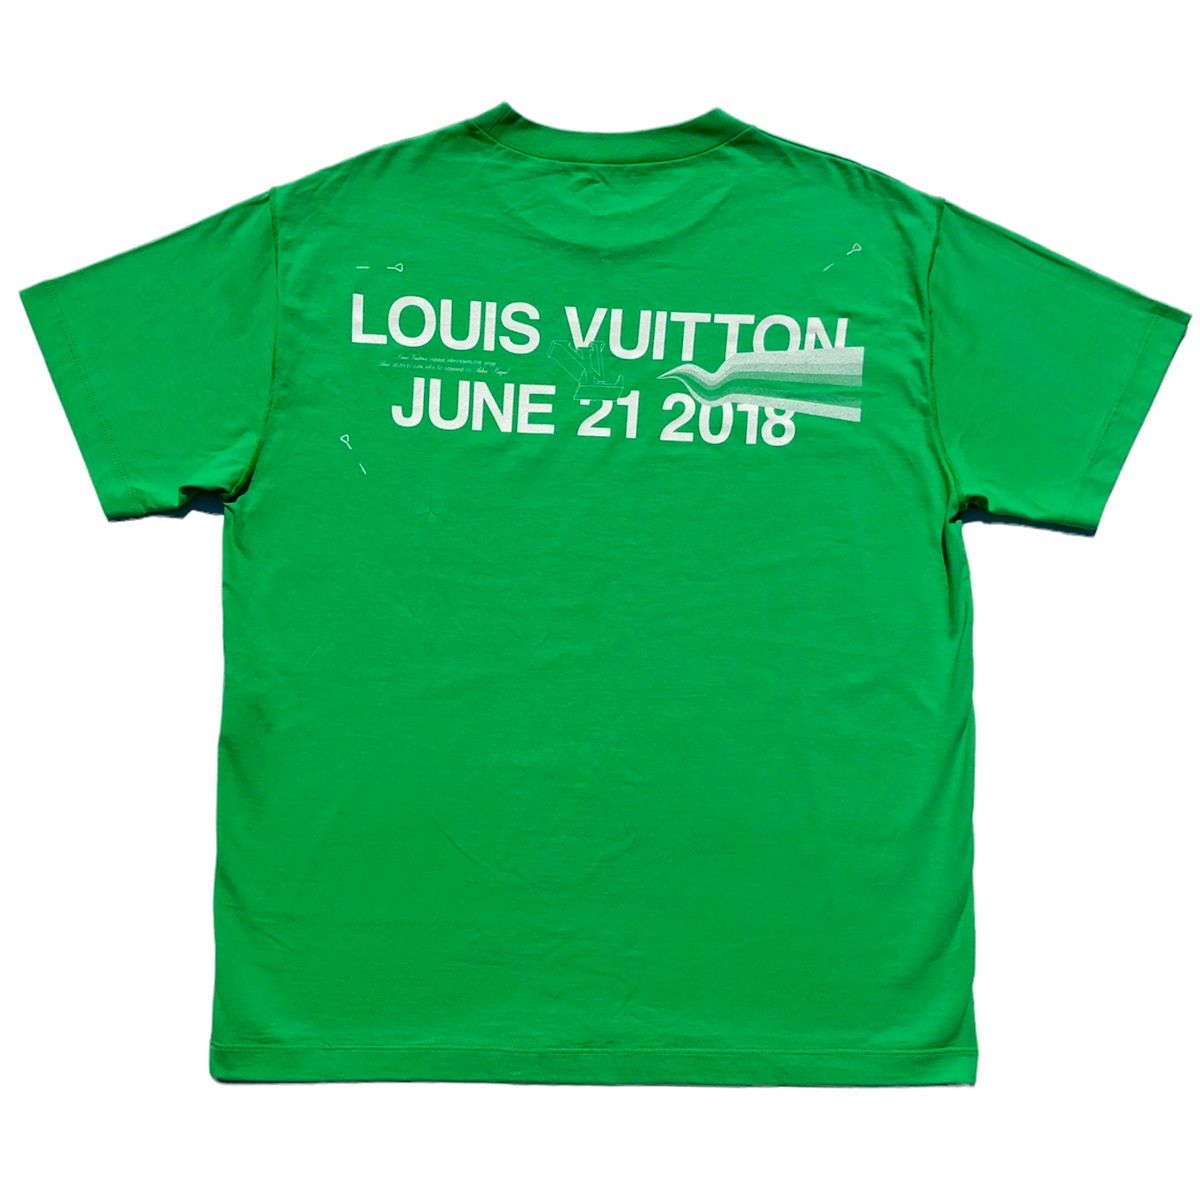 Lv Camo Jacquard T-shirt from Louis Vuitton on 21 Buttons